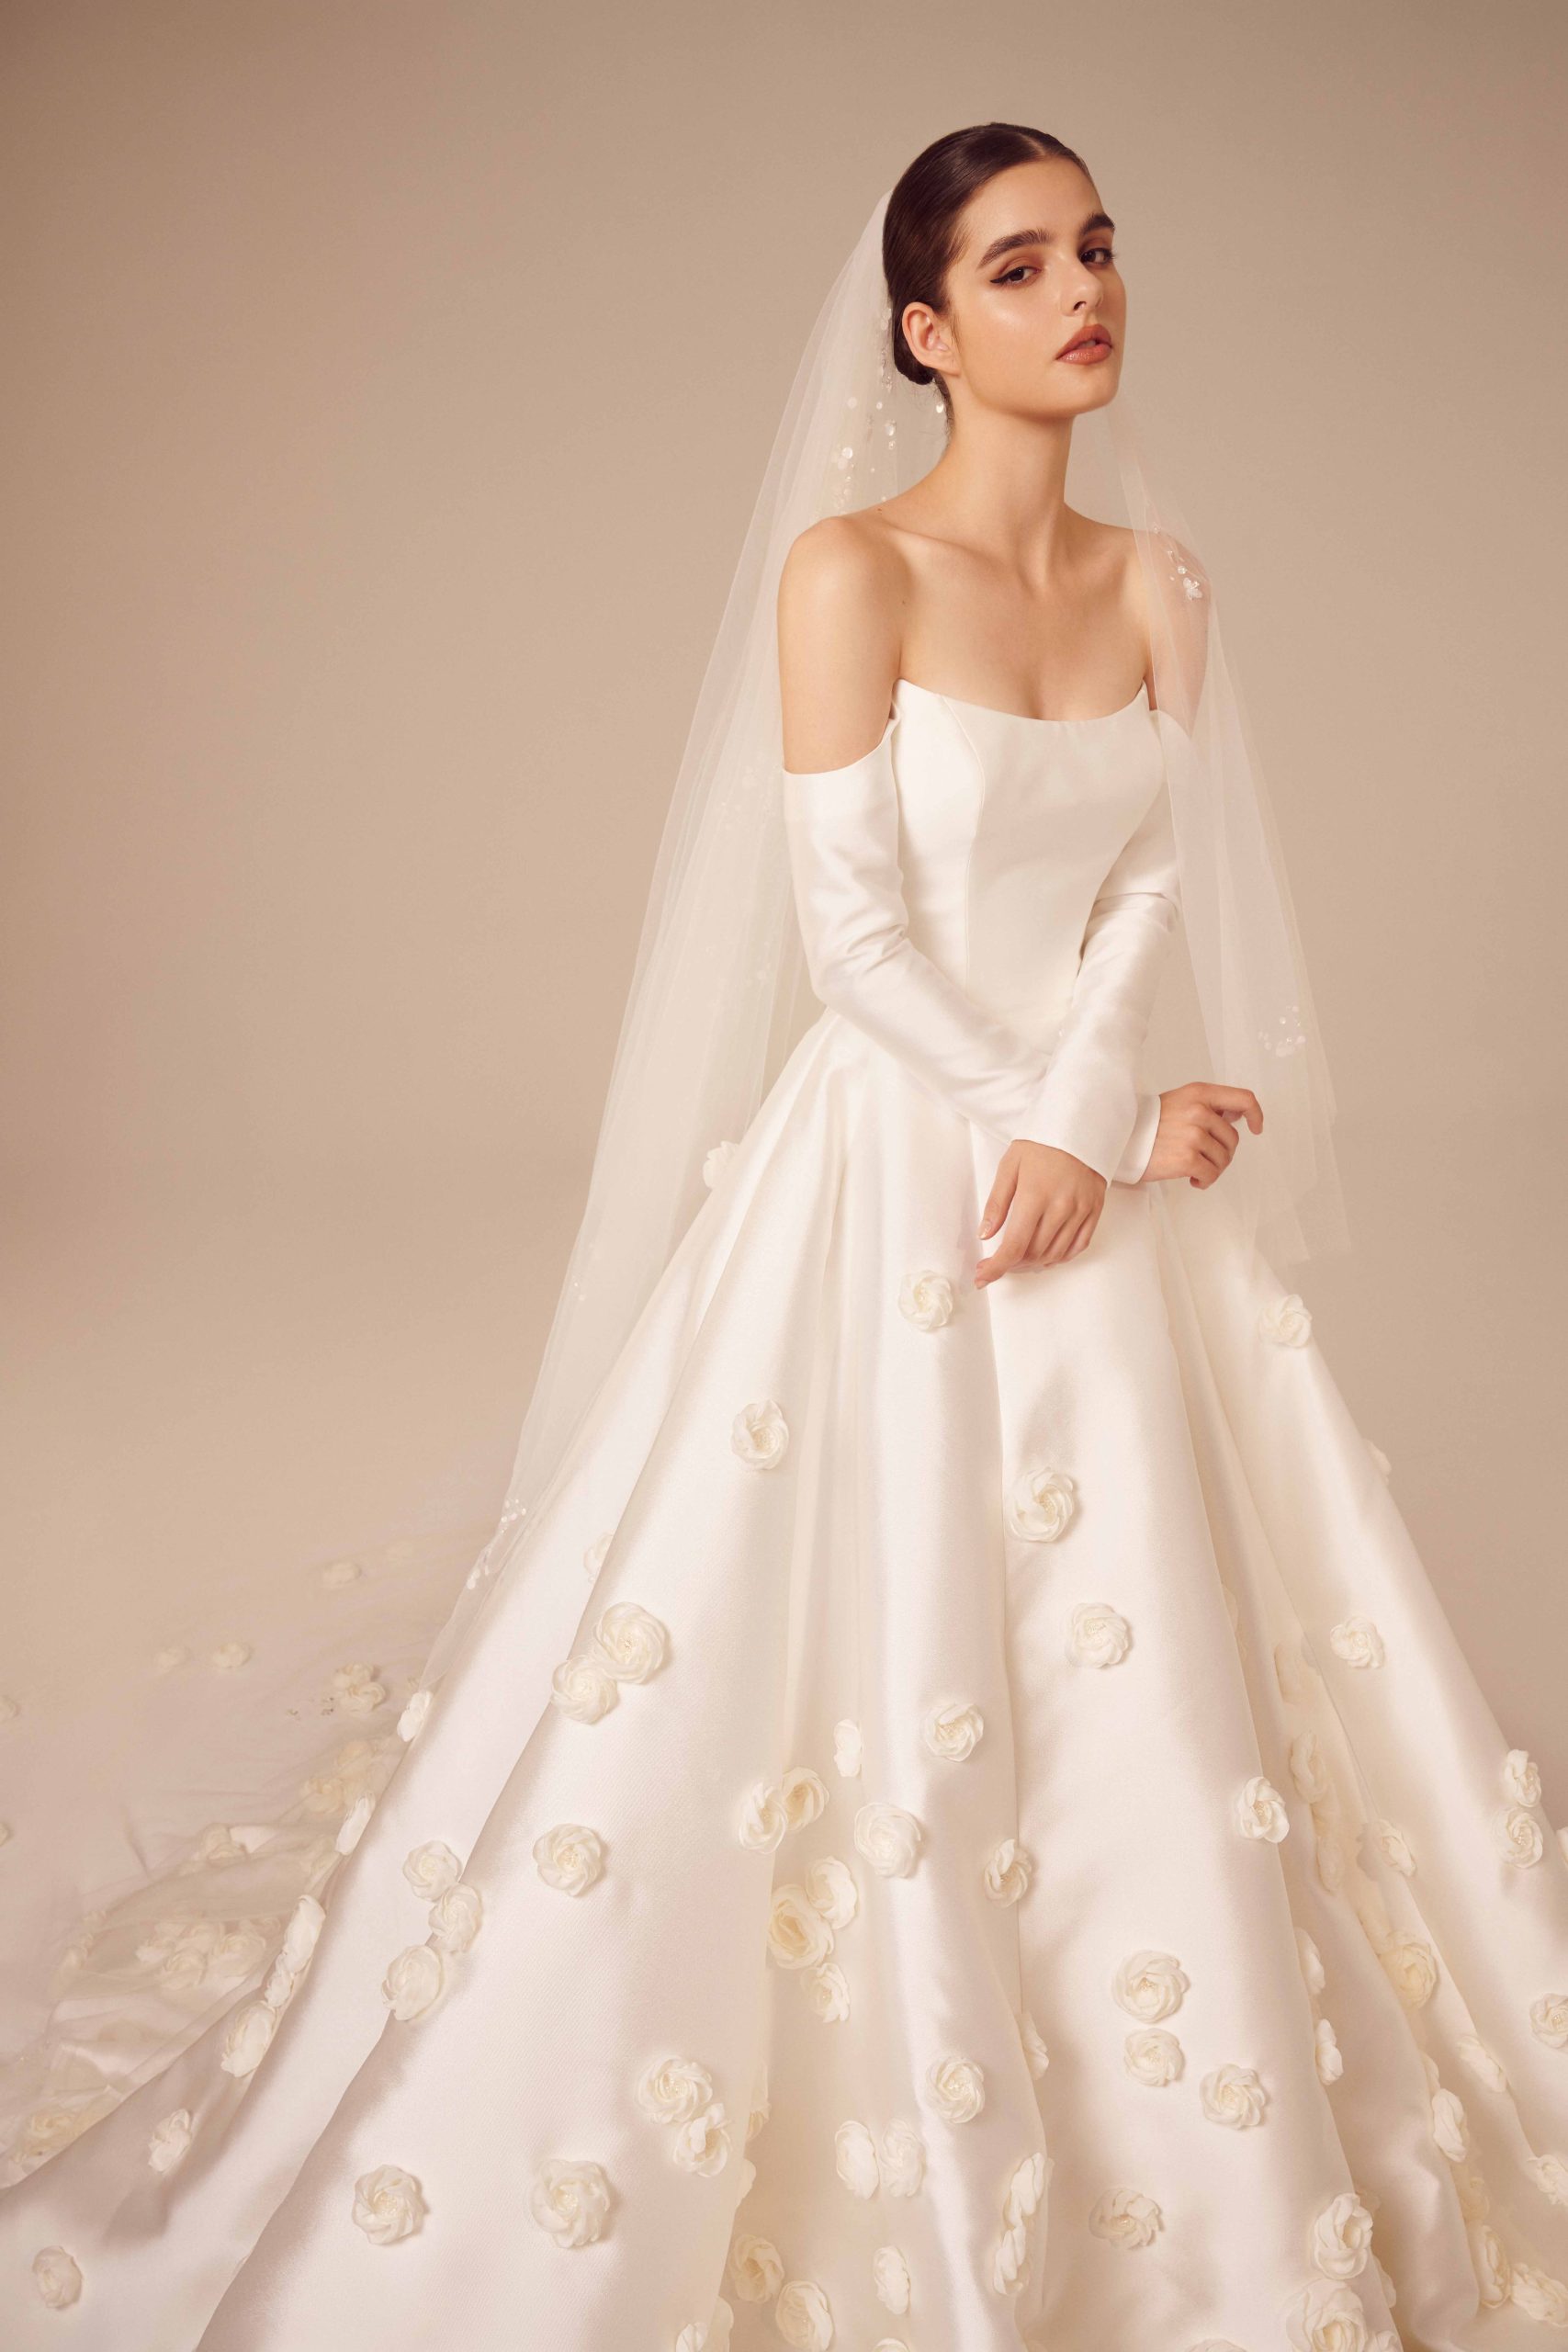 Off-the-Shoulder Mikado Ball Gown With Floral Appliqué by Nicole + Felicia - Image 2